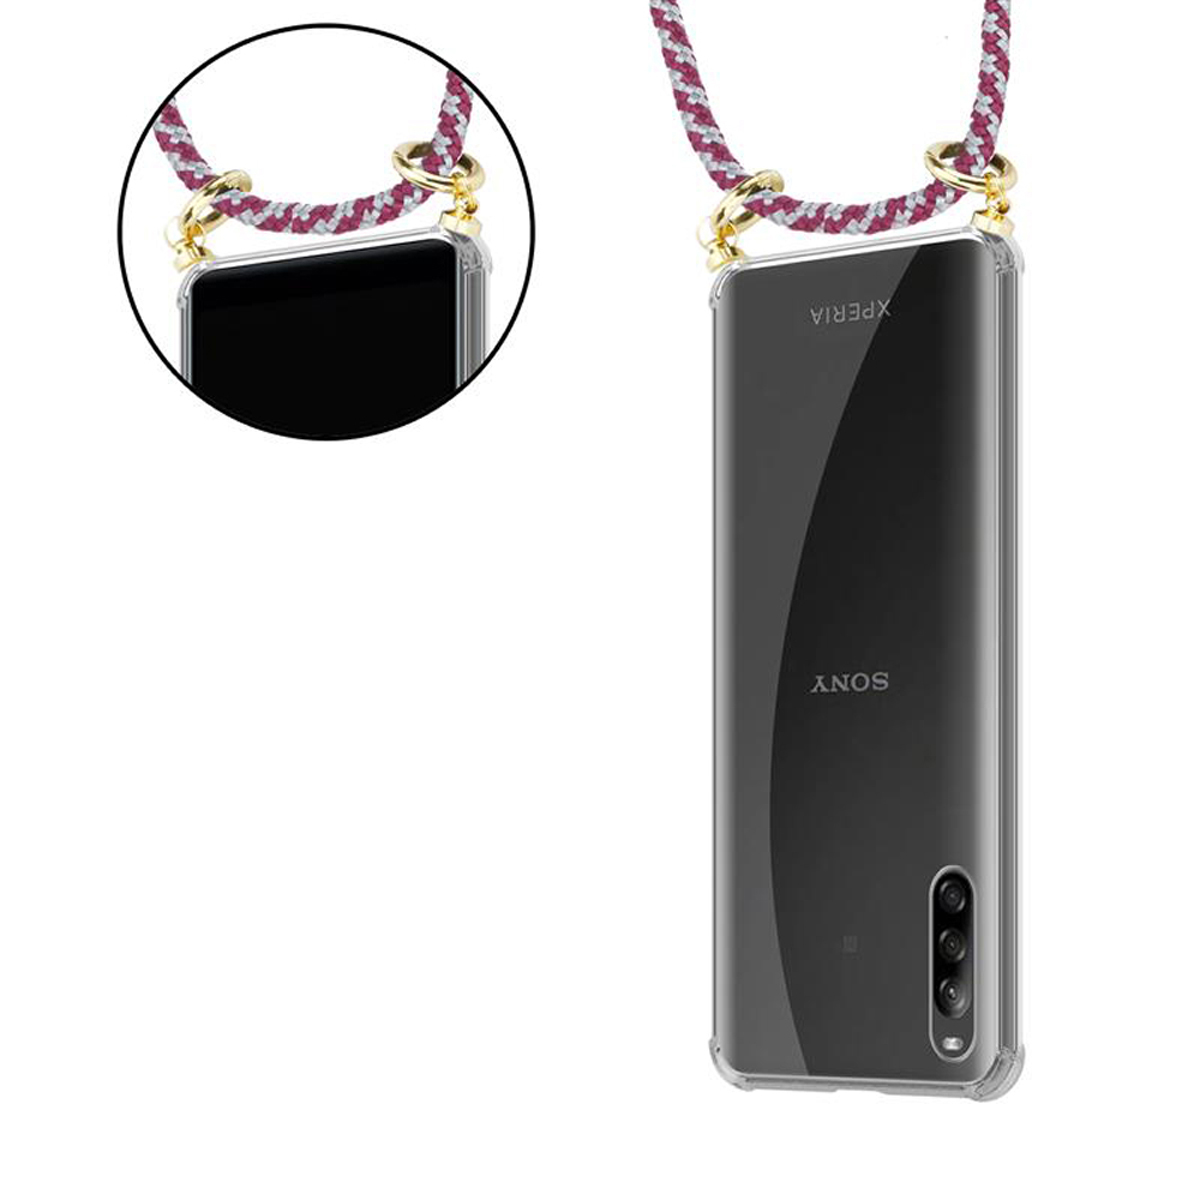 und L4, Hülle, Band Backcover, WEIß Sony, Xperia Handy Kordel Gold abnehmbarer ROT mit Ringen, CADORABO Kette